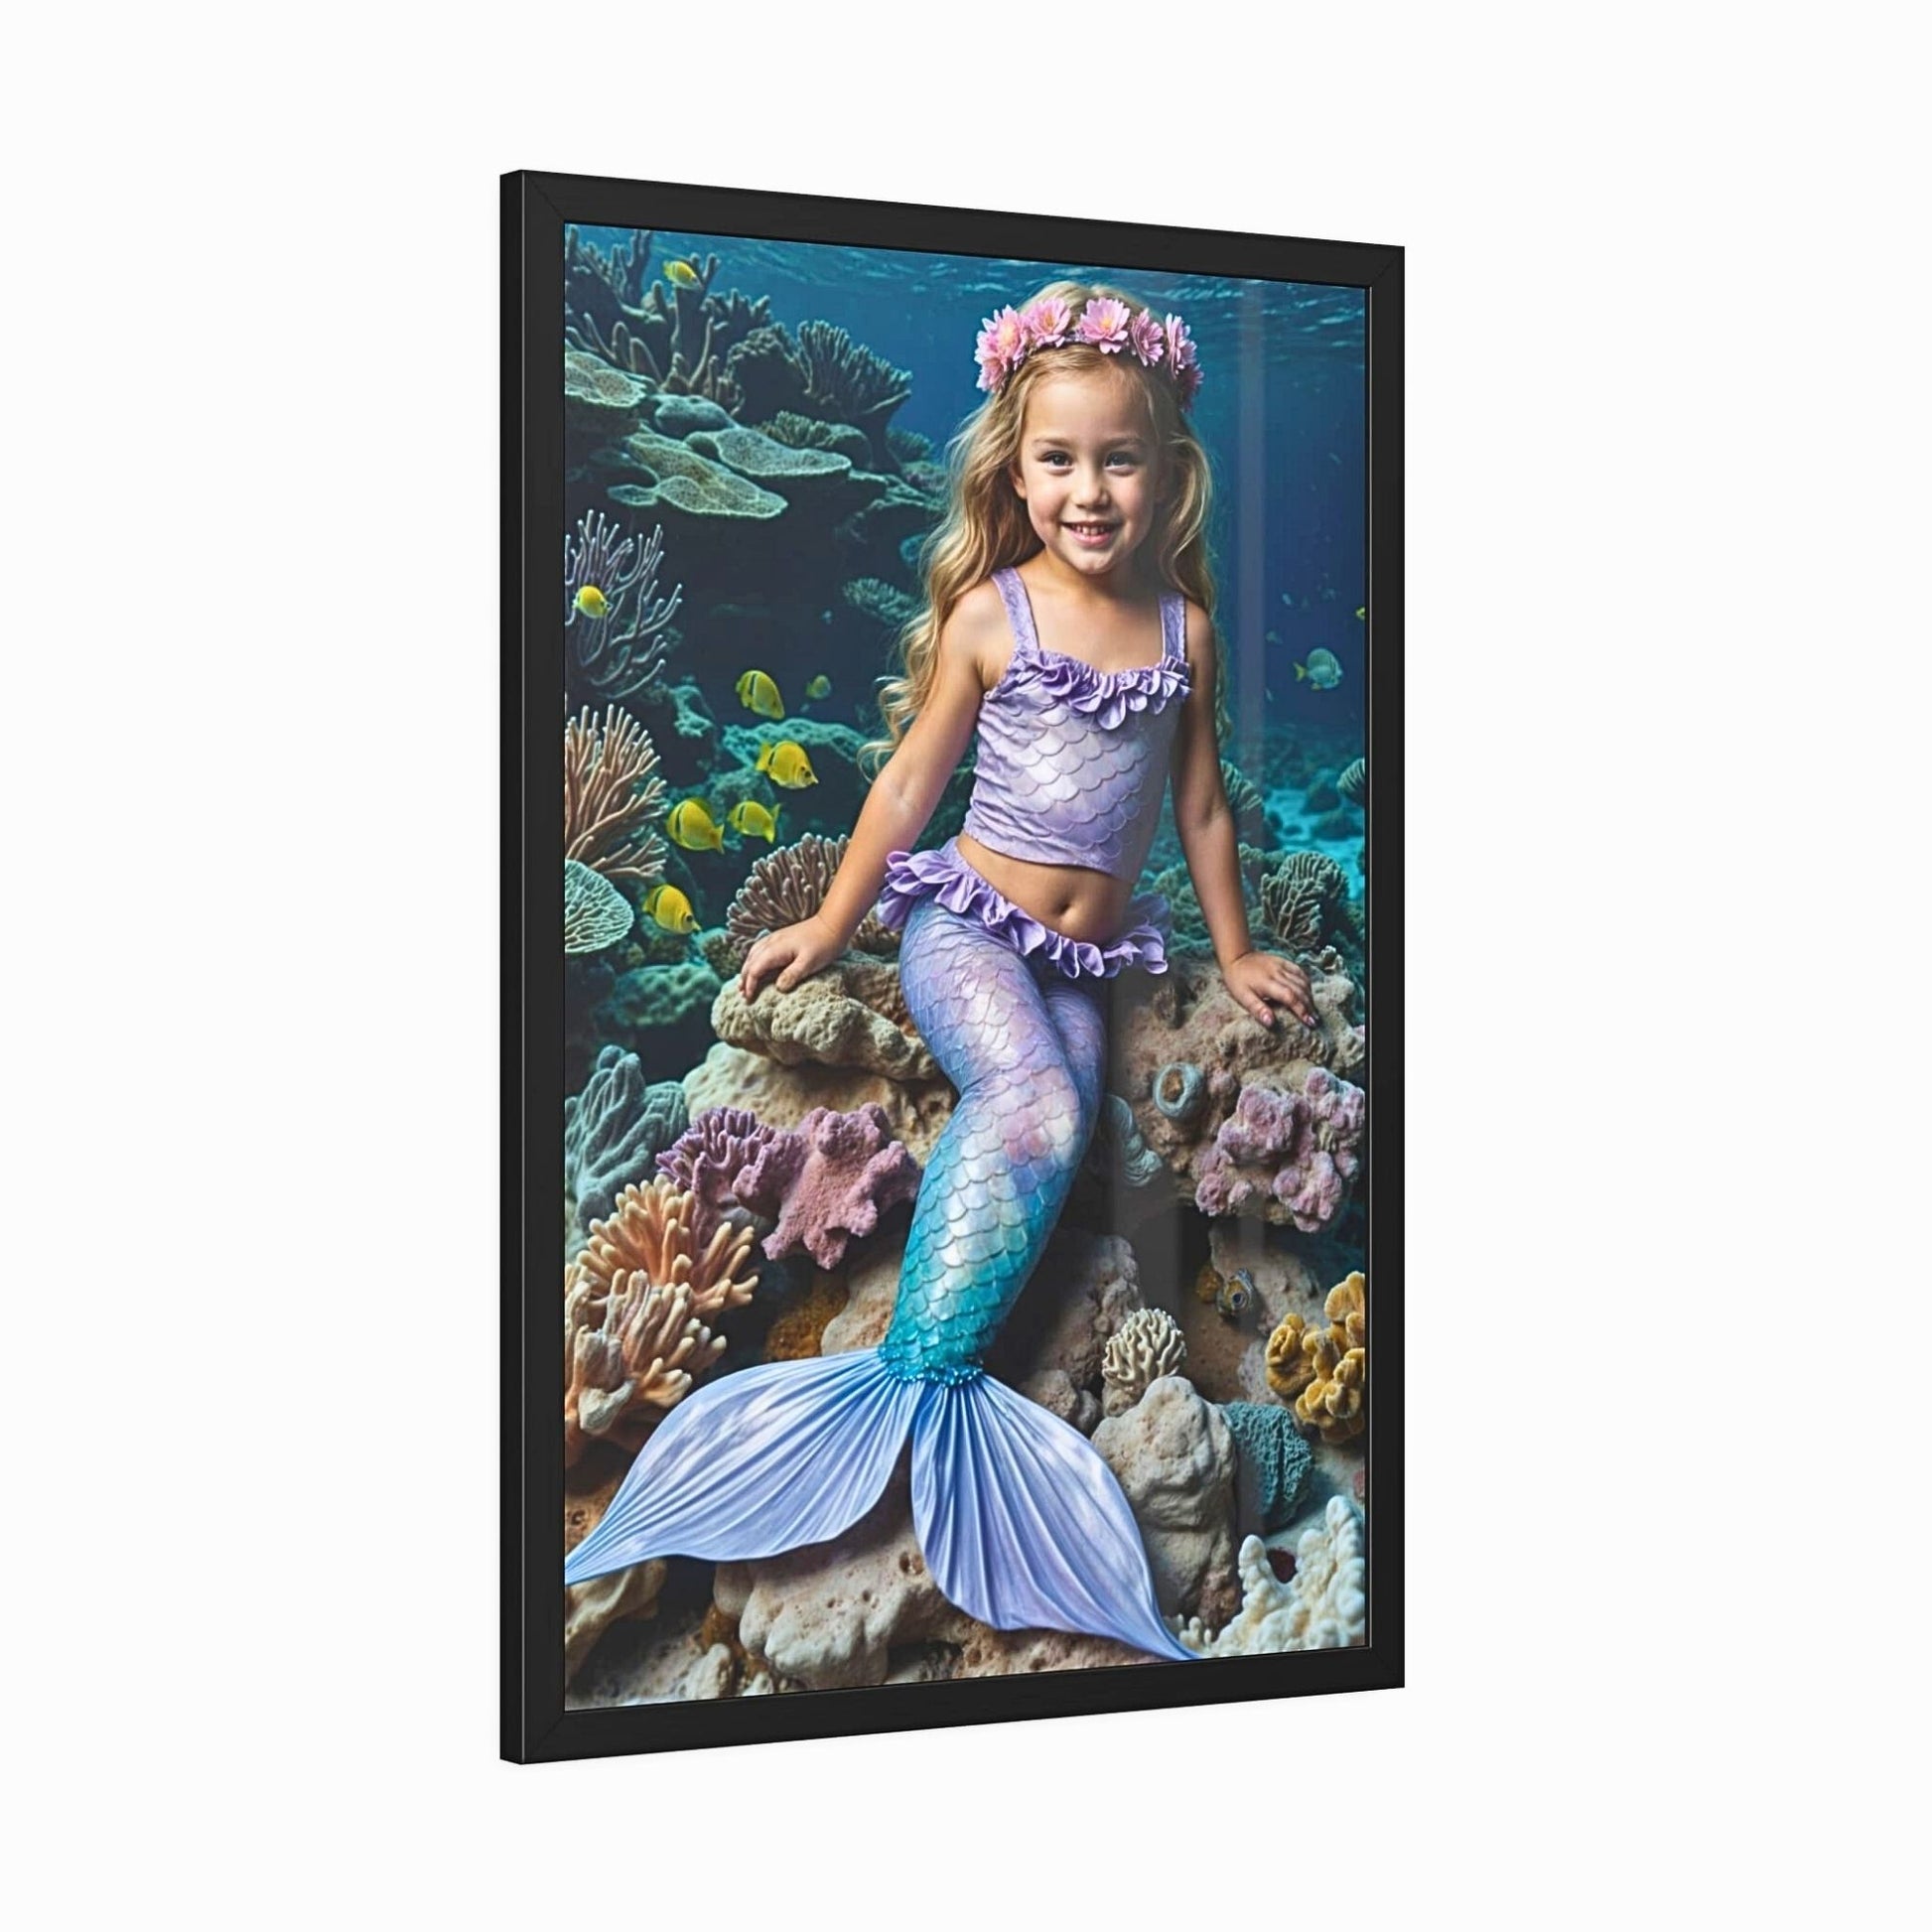 Create magical memories with our Custom Mermaid Portrait from Photo. Personalized Princess Mermaid Portraits make perfect Birthday Gifts for your daughter. Add charm to any space with unique Wall Art. Ideal for daughters, sisters, moms, and girlfriends, these Custom Mermaid Art portraits are unforgettable gifts. Turn photos into enchanting personalized keepsakes.